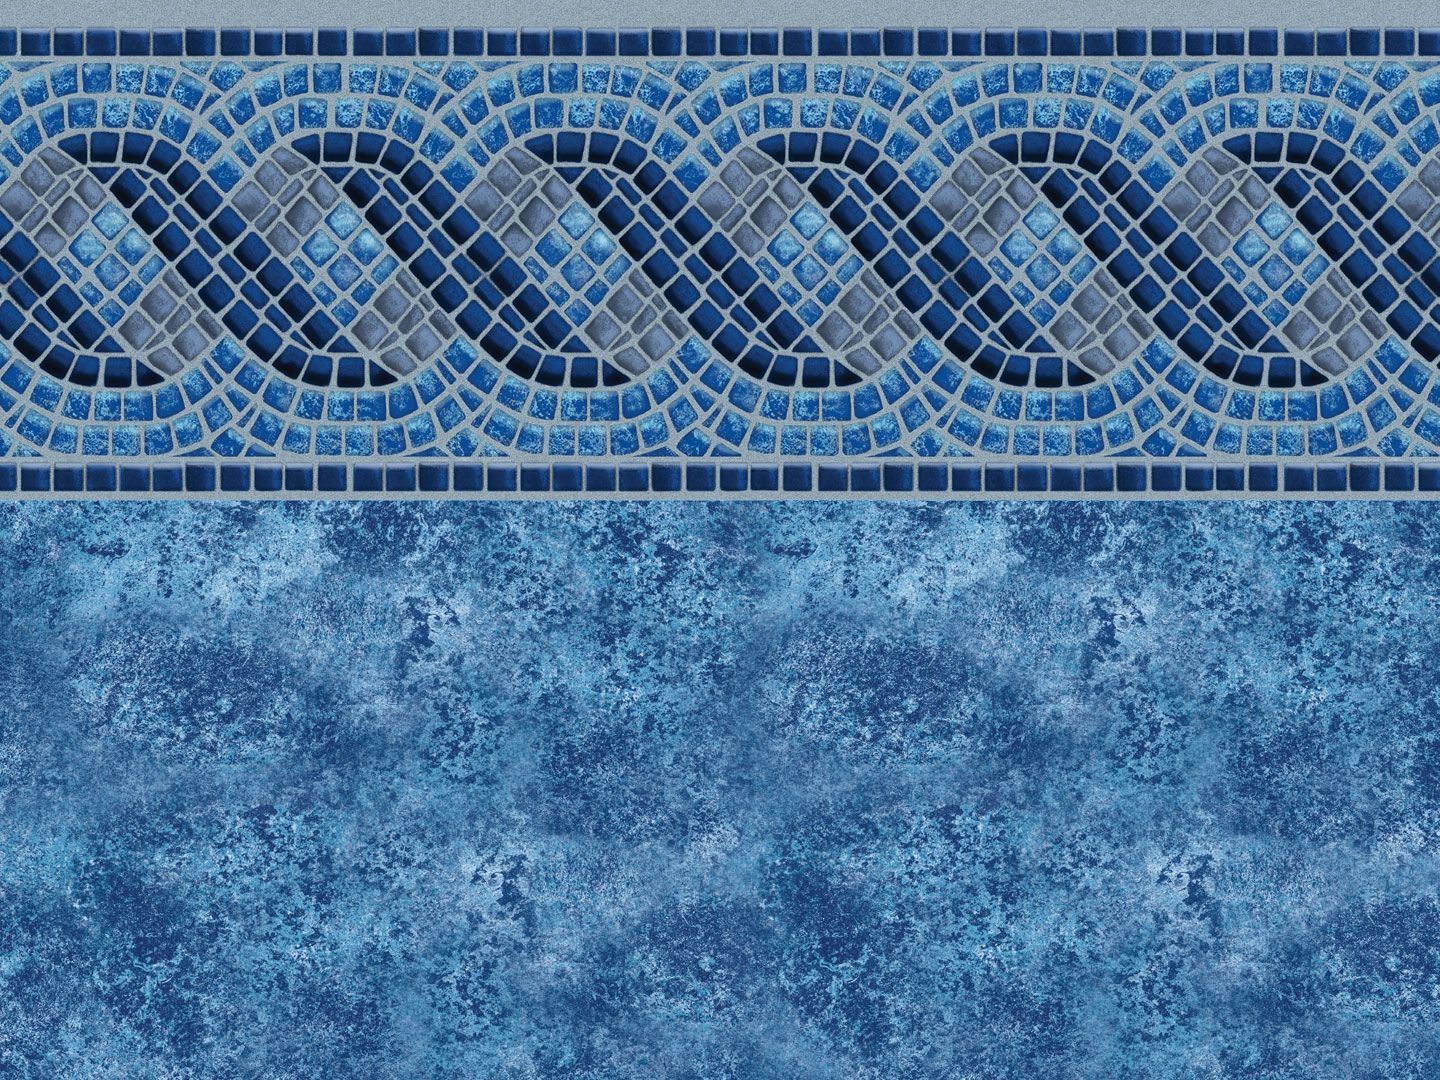 Gulf Breeze 20 mil American made virgin vinyl liner pattern for in-ground swimming pools